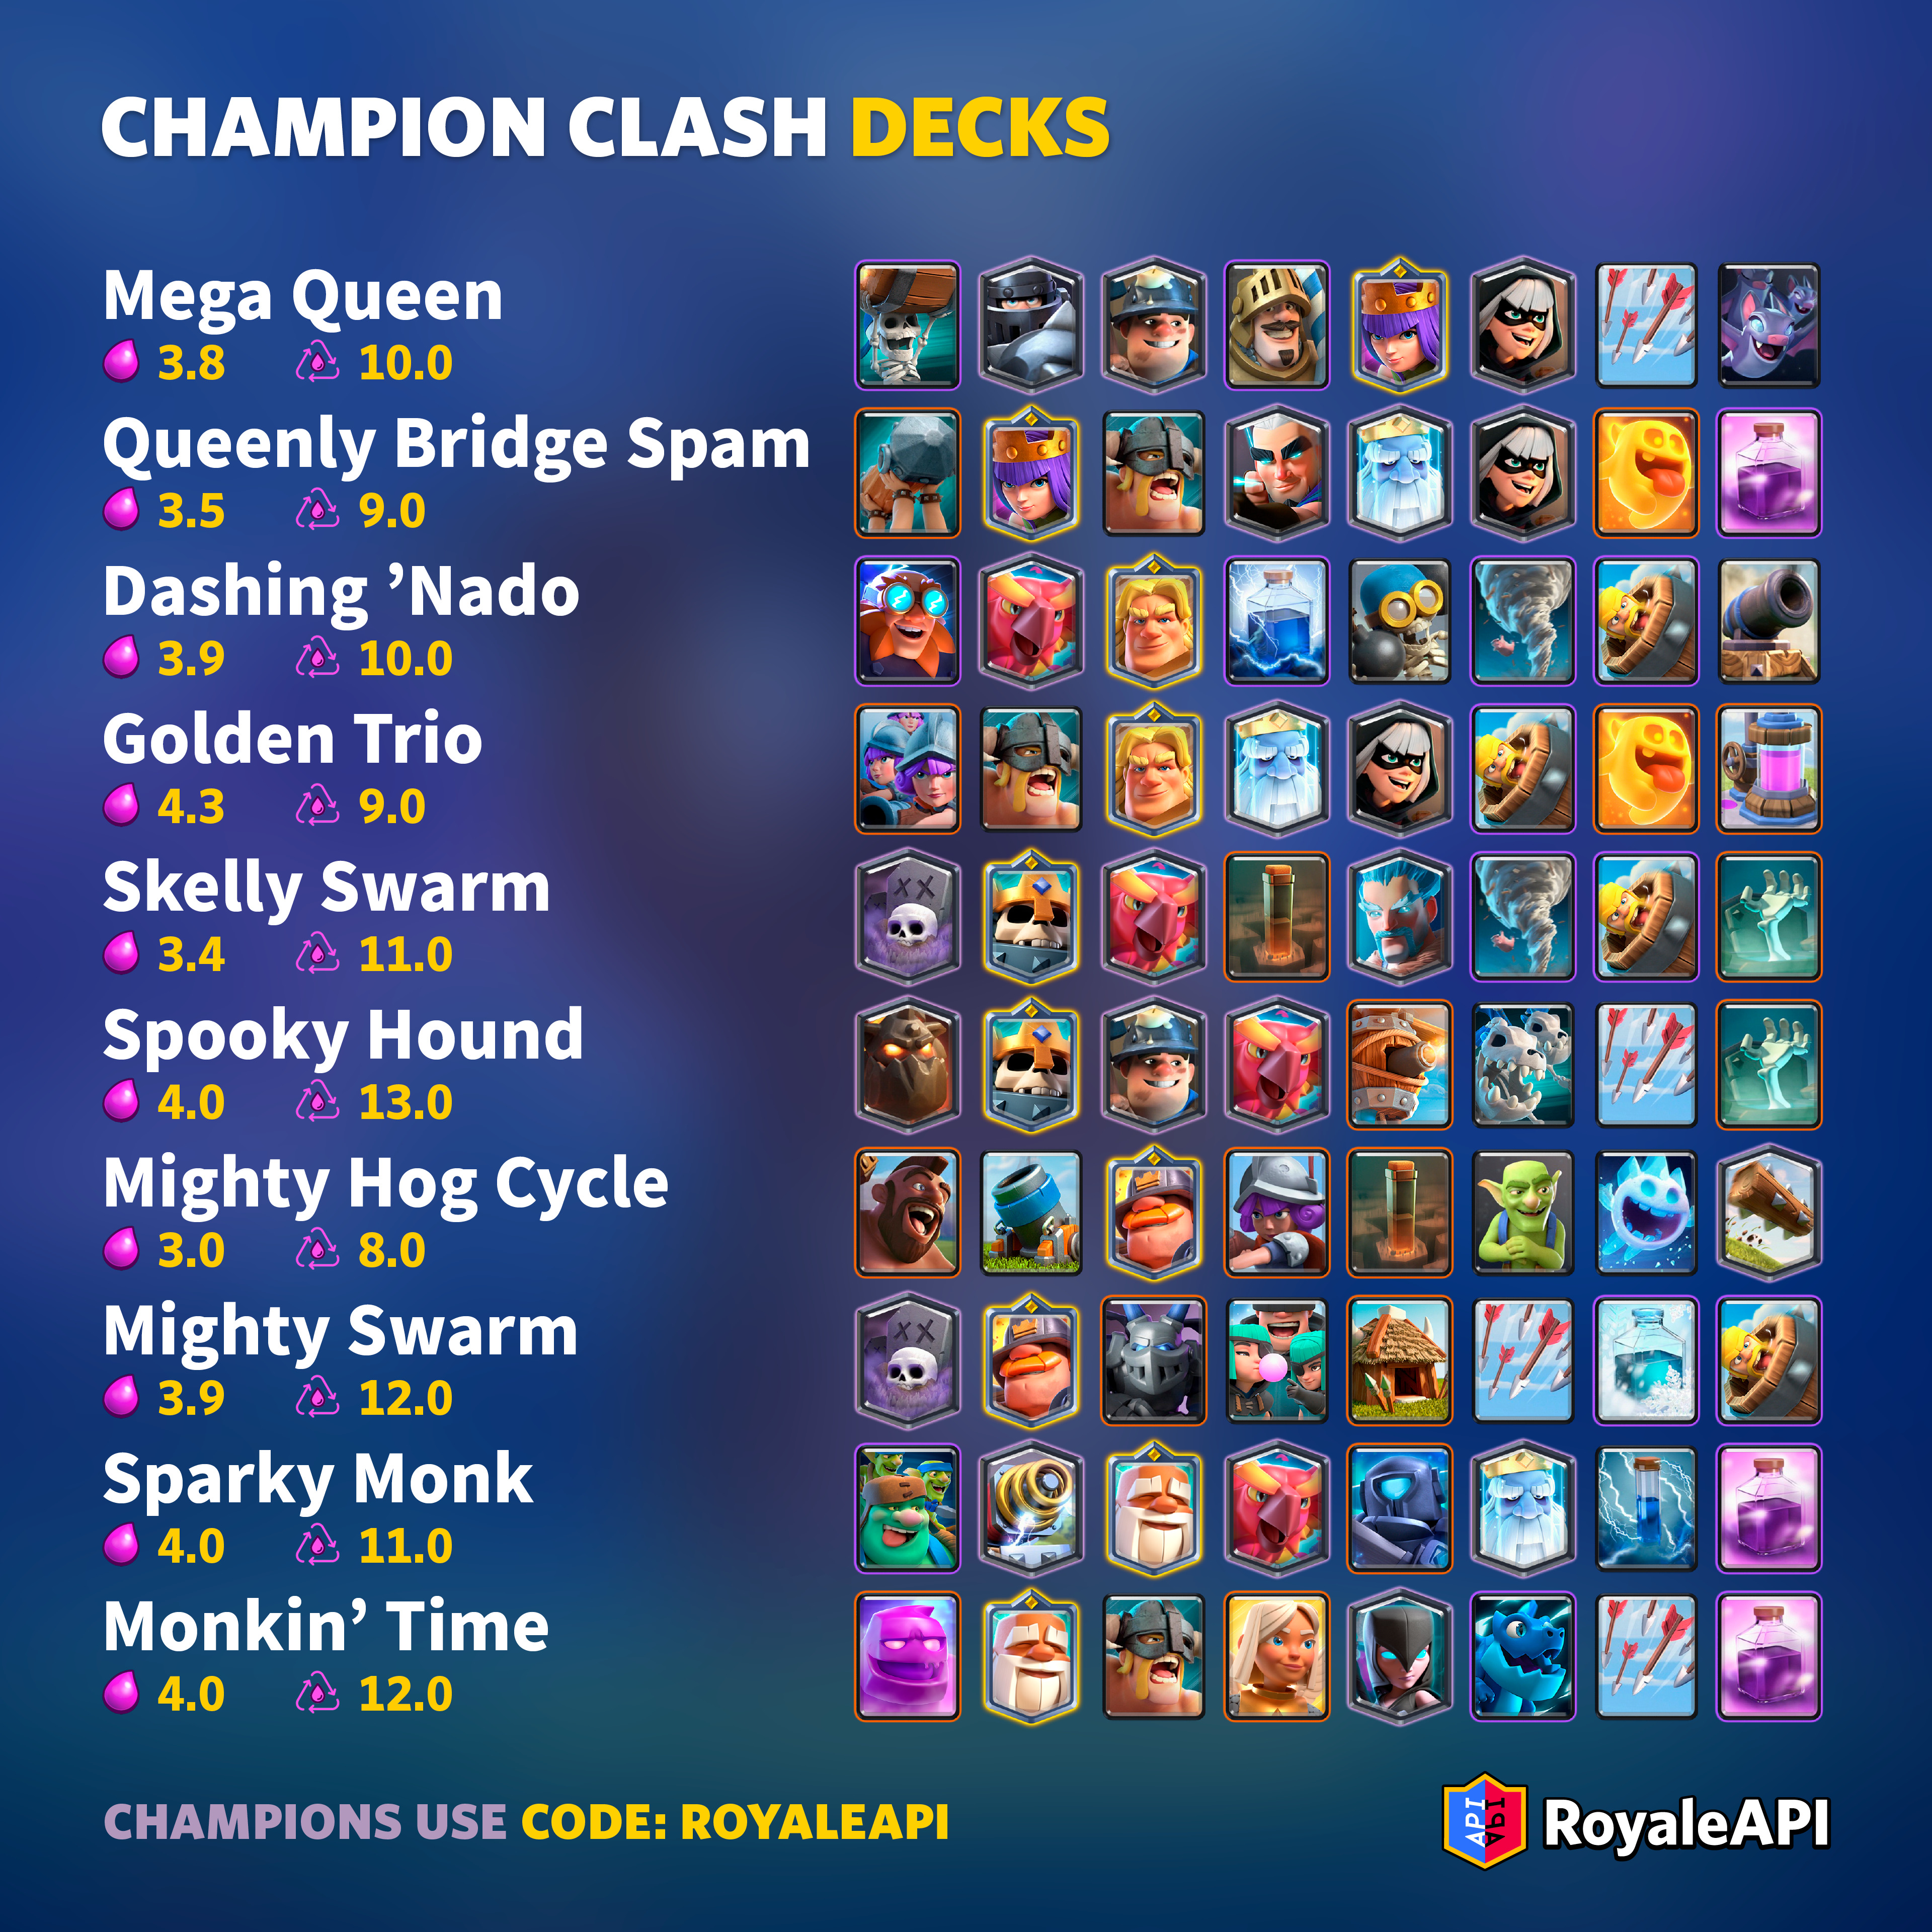 RoyaleAPI on X: 🏆 These are the best decks for Ultimate Champion (League  10) so far. See the rest of the decks on our site! 👉   #ClashRoyale #クラロワ  / X